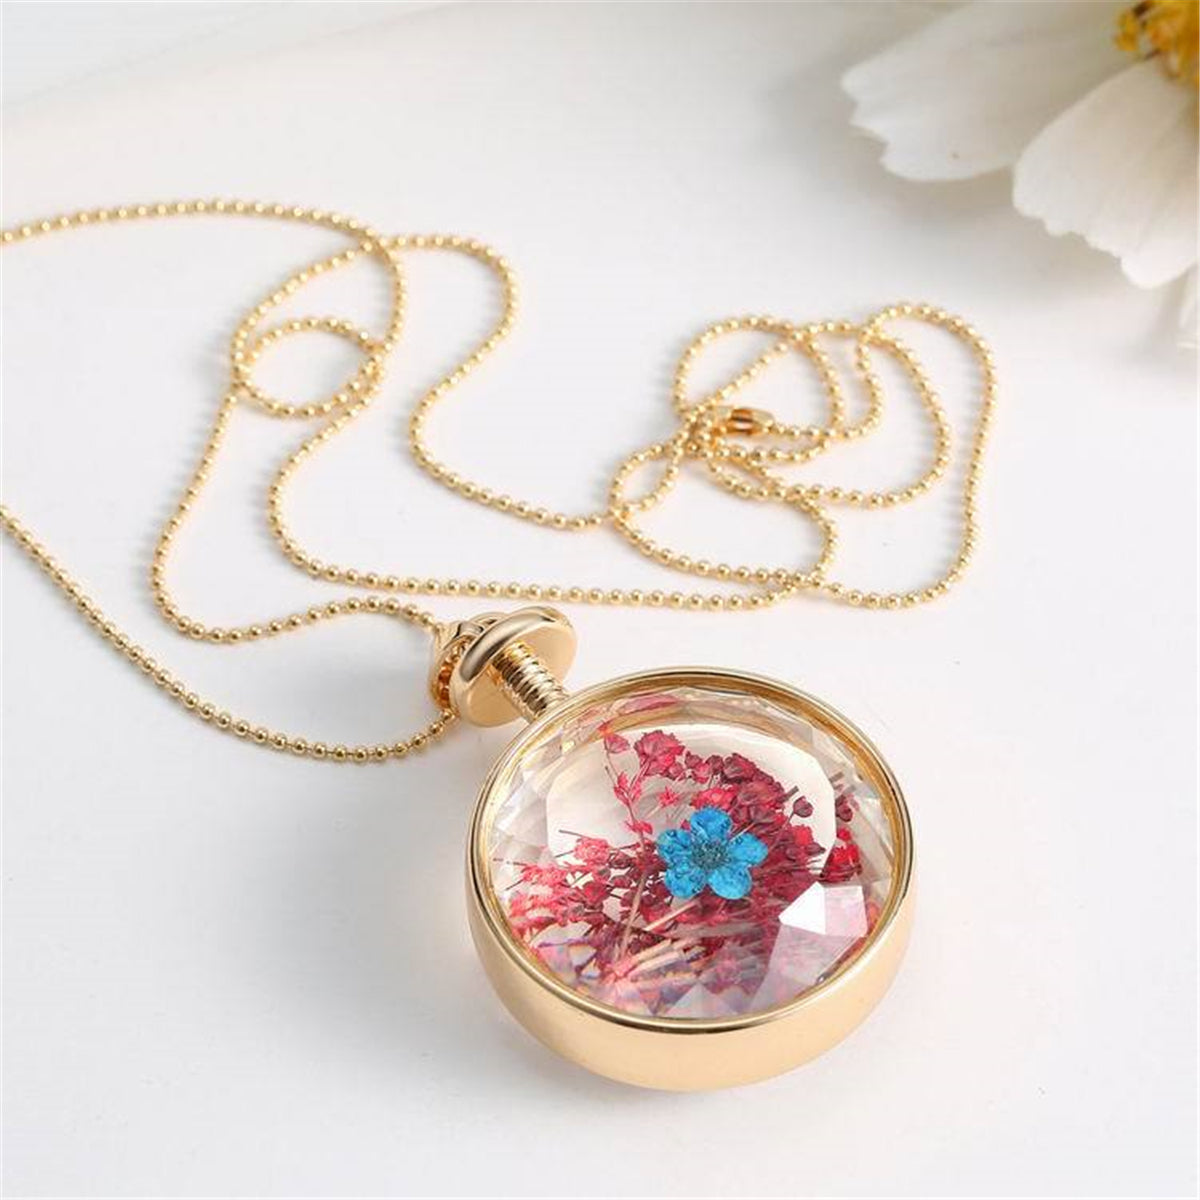 Red Peach Blossom & 18K Gold-Plated Round Pendant Necklace